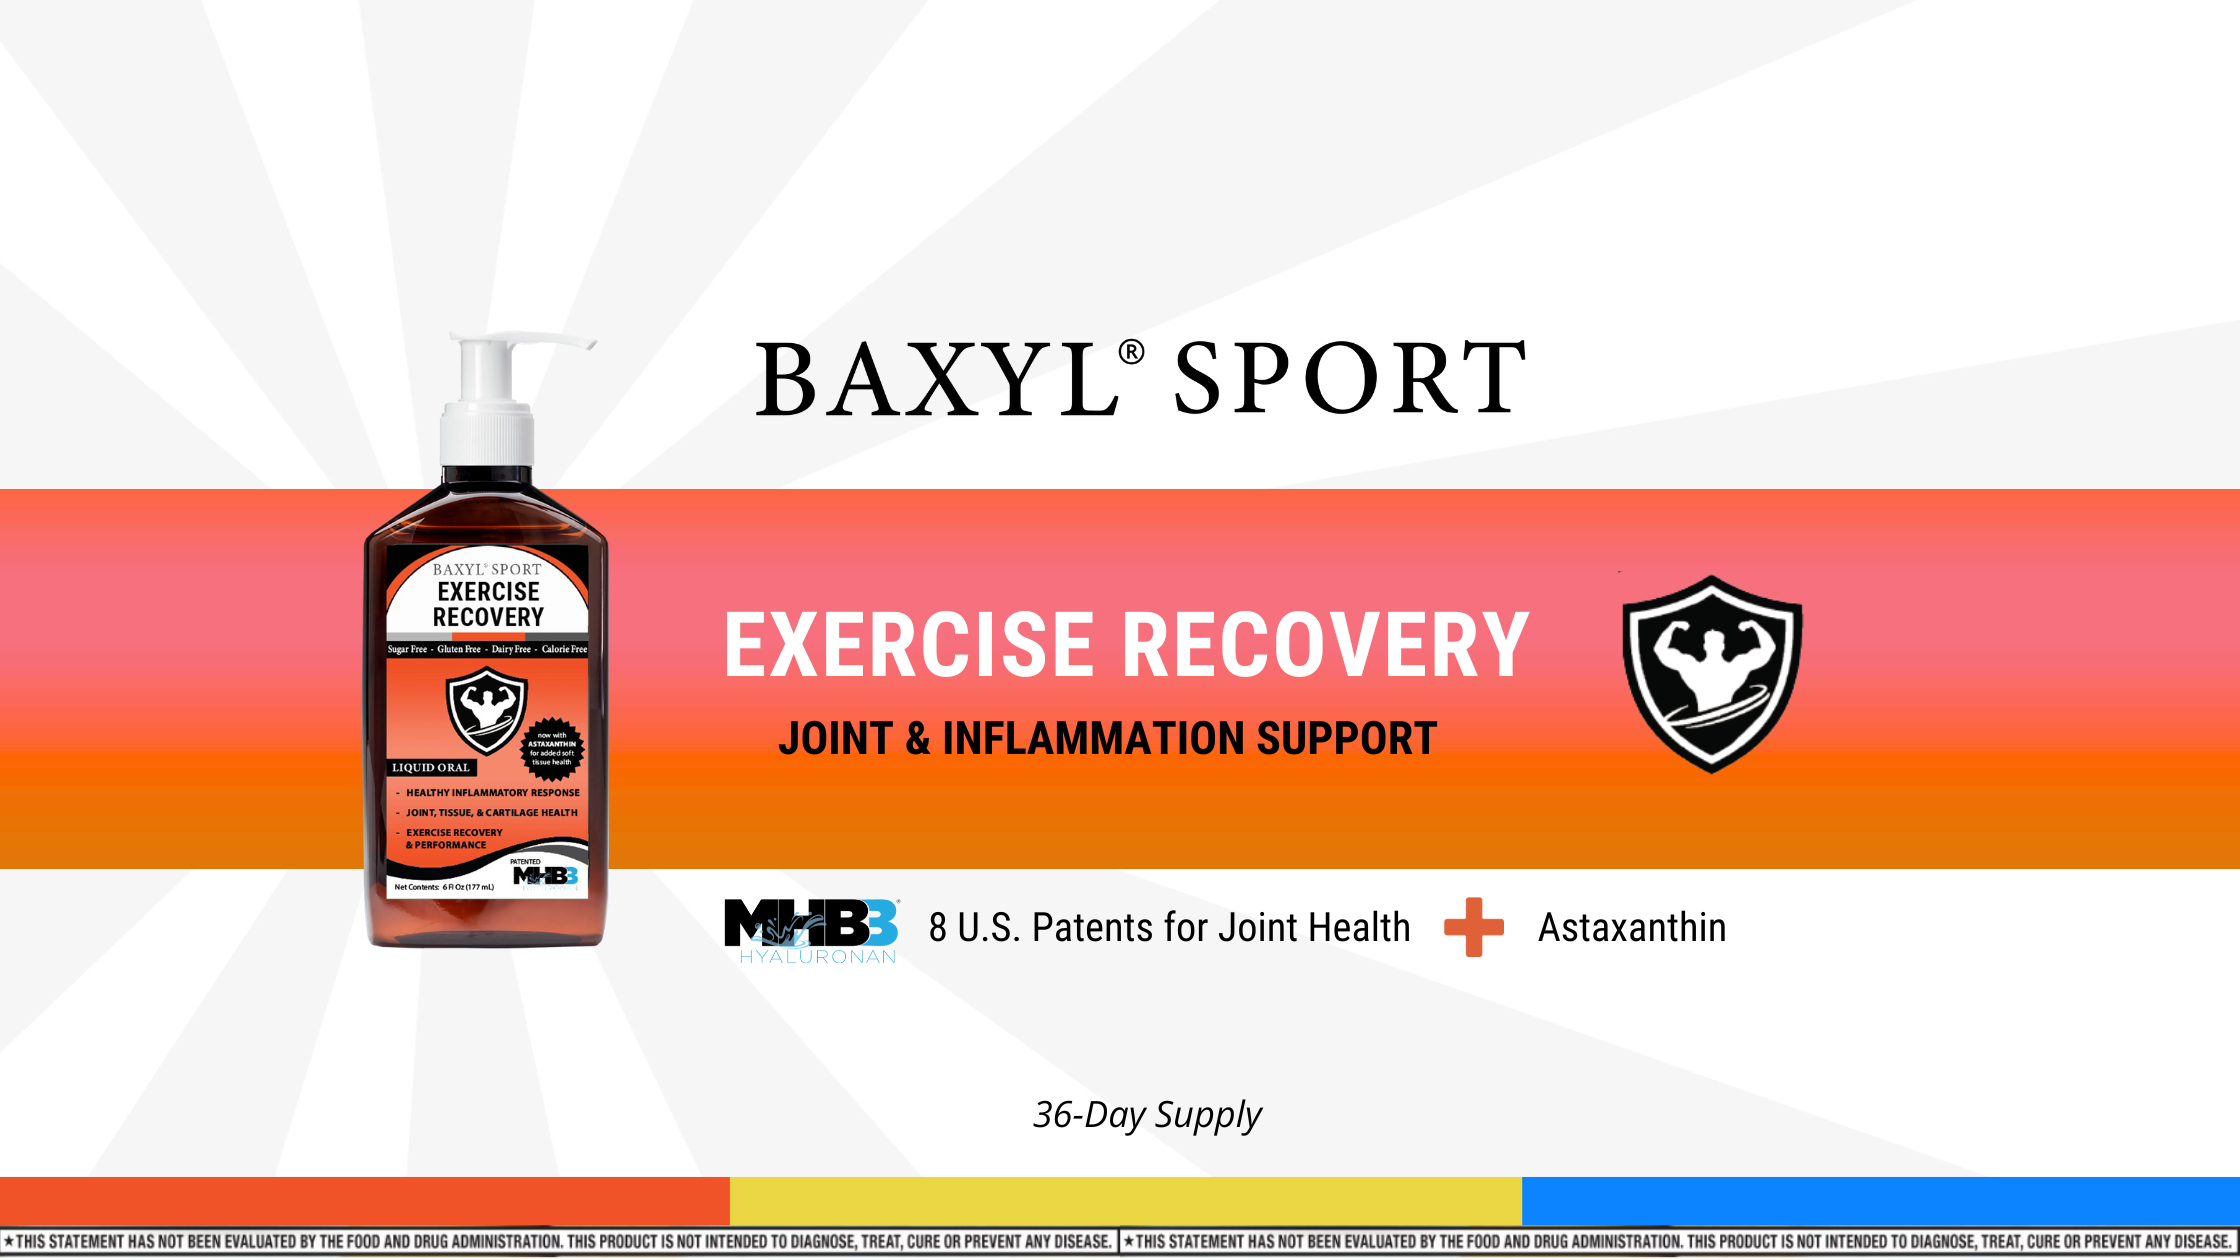 Orange Baxyl Sport exercise recovery supplement that says joint bone and inflammation support for bodybuilders marathon runners and cyclists